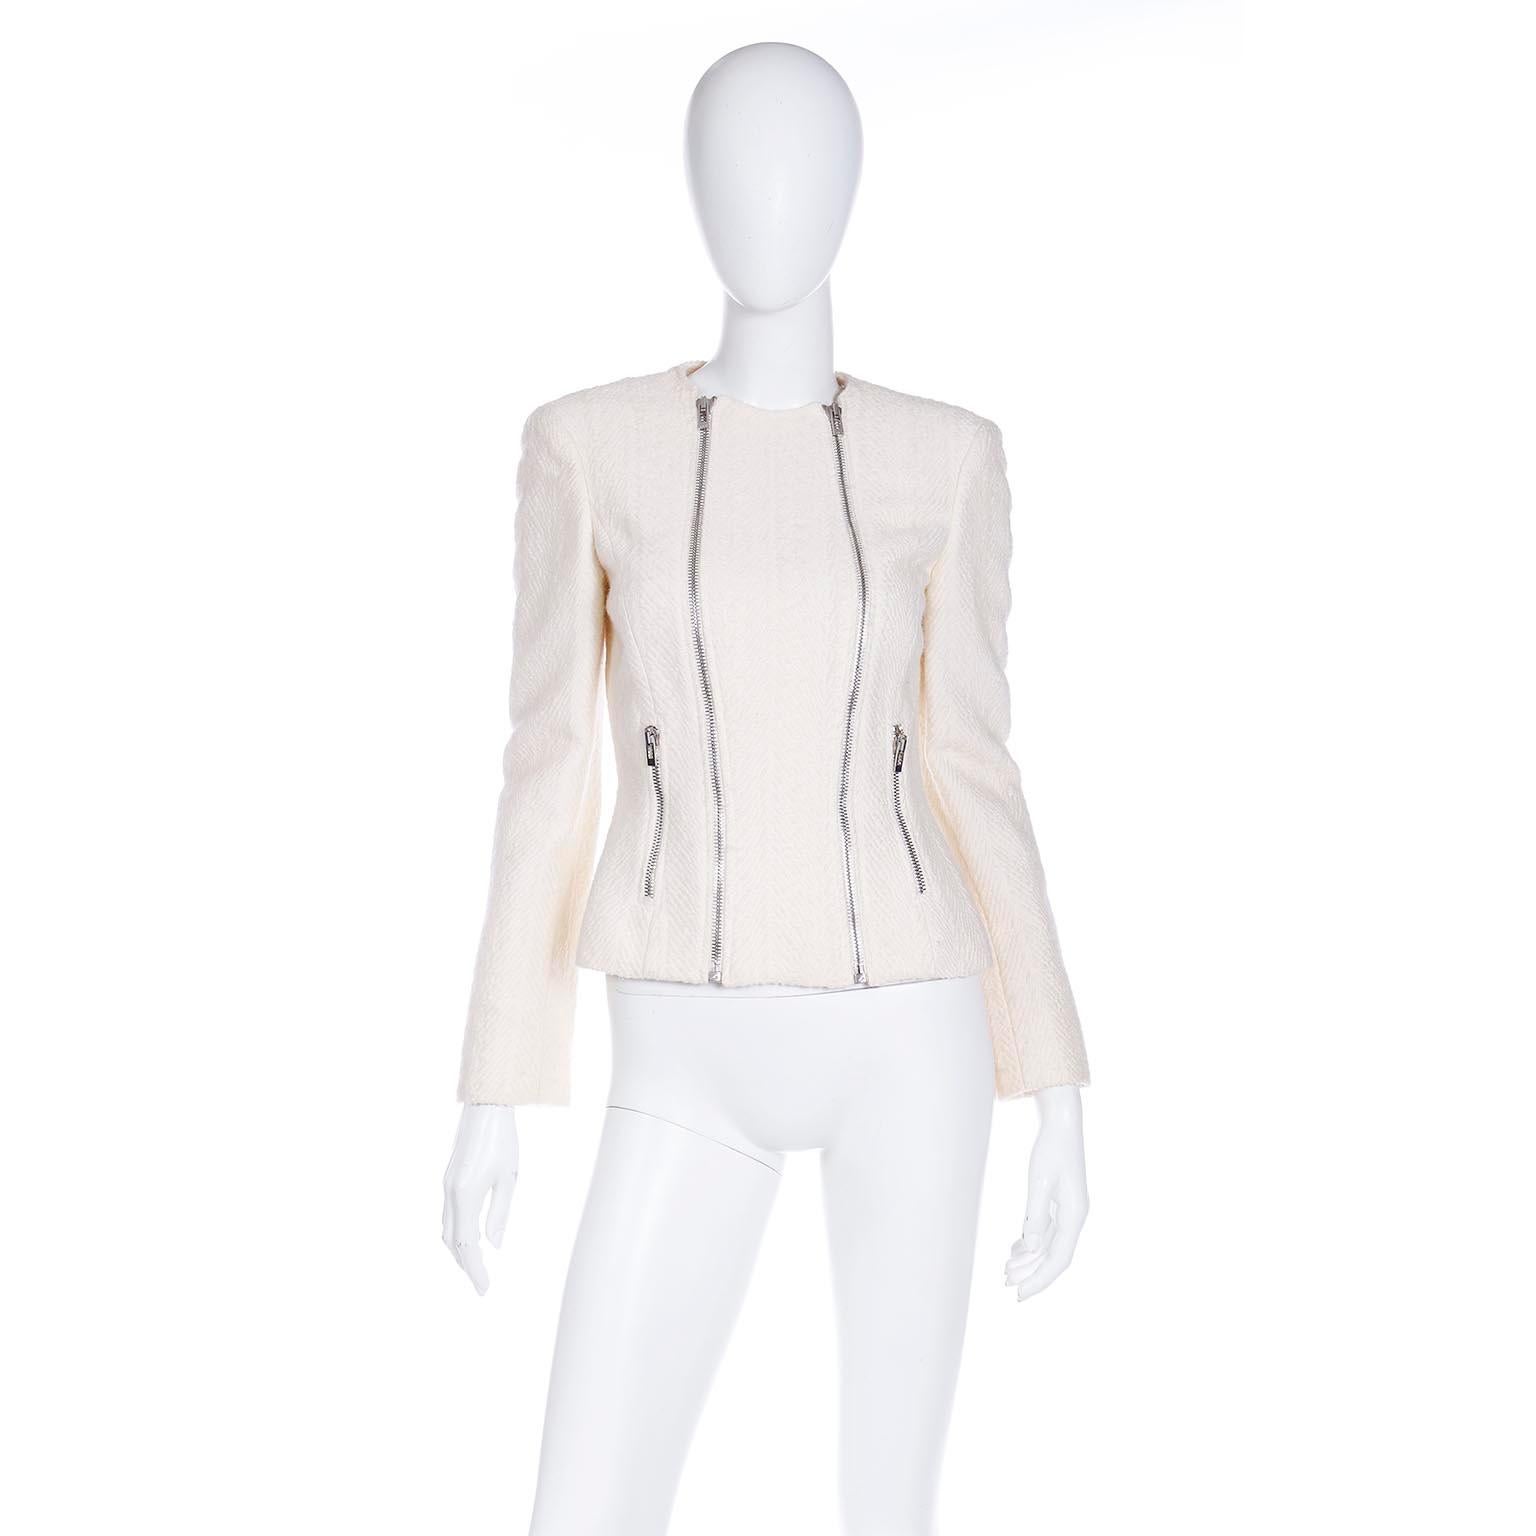 This versatile Gianni Versace winter white wool boucle jacket has double zipper front closures that give the piece a number of options for different looks as both of the zippers function from the top and the bottom. Donatella Versace designed this